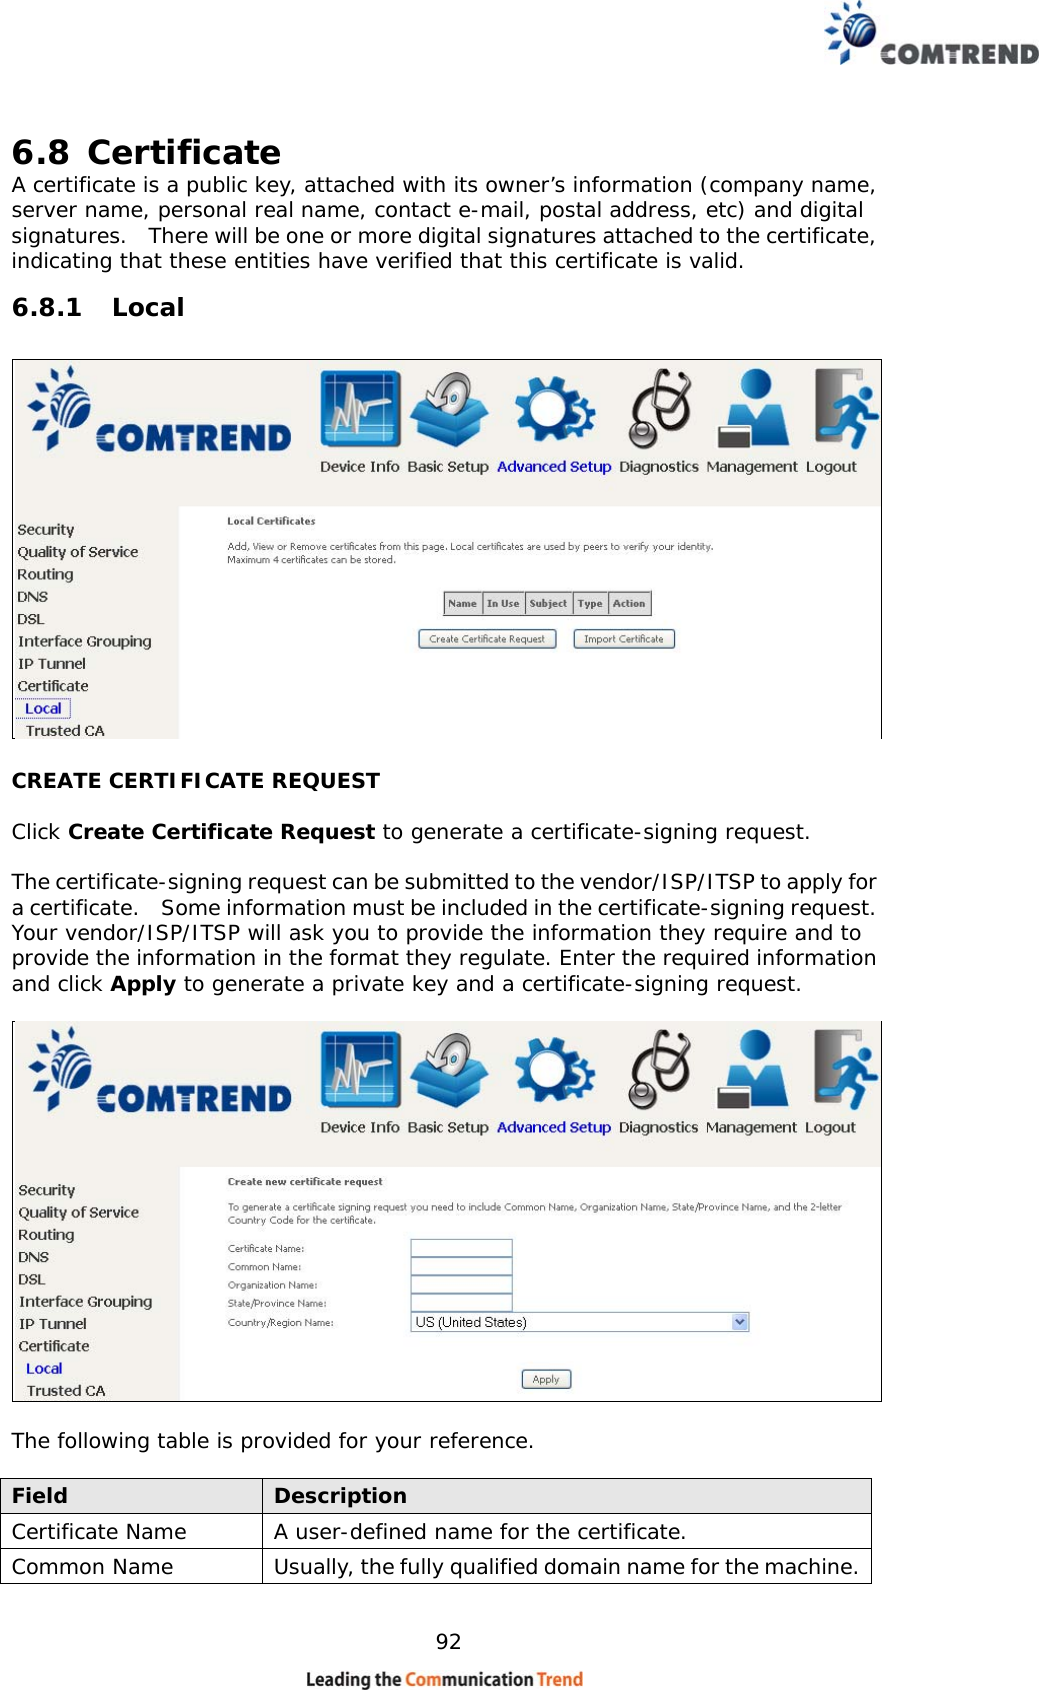    92 6.8 Certificate A certificate is a public key, attached with its owner’s information (company name, server name, personal real name, contact e-mail, postal address, etc) and digital signatures.    There will be one or more digital signatures attached to the certificate, indicating that these entities have verified that this certificate is valid. 6.8.1 Local  CREATE CERTIFICATE REQUEST  Click Create Certificate Request to generate a certificate-signing request.   The certificate-signing request can be submitted to the vendor/ISP/ITSP to apply for a certificate.    Some information must be included in the certificate-signing request.   Your vendor/ISP/ITSP will ask you to provide the information they require and to provide the information in the format they regulate. Enter the required information and click Apply to generate a private key and a certificate-signing request.      The following table is provided for your reference.  Field  Description Certificate Name  A user-defined name for the certificate. Common Name  Usually, the fully qualified domain name for the machine.  